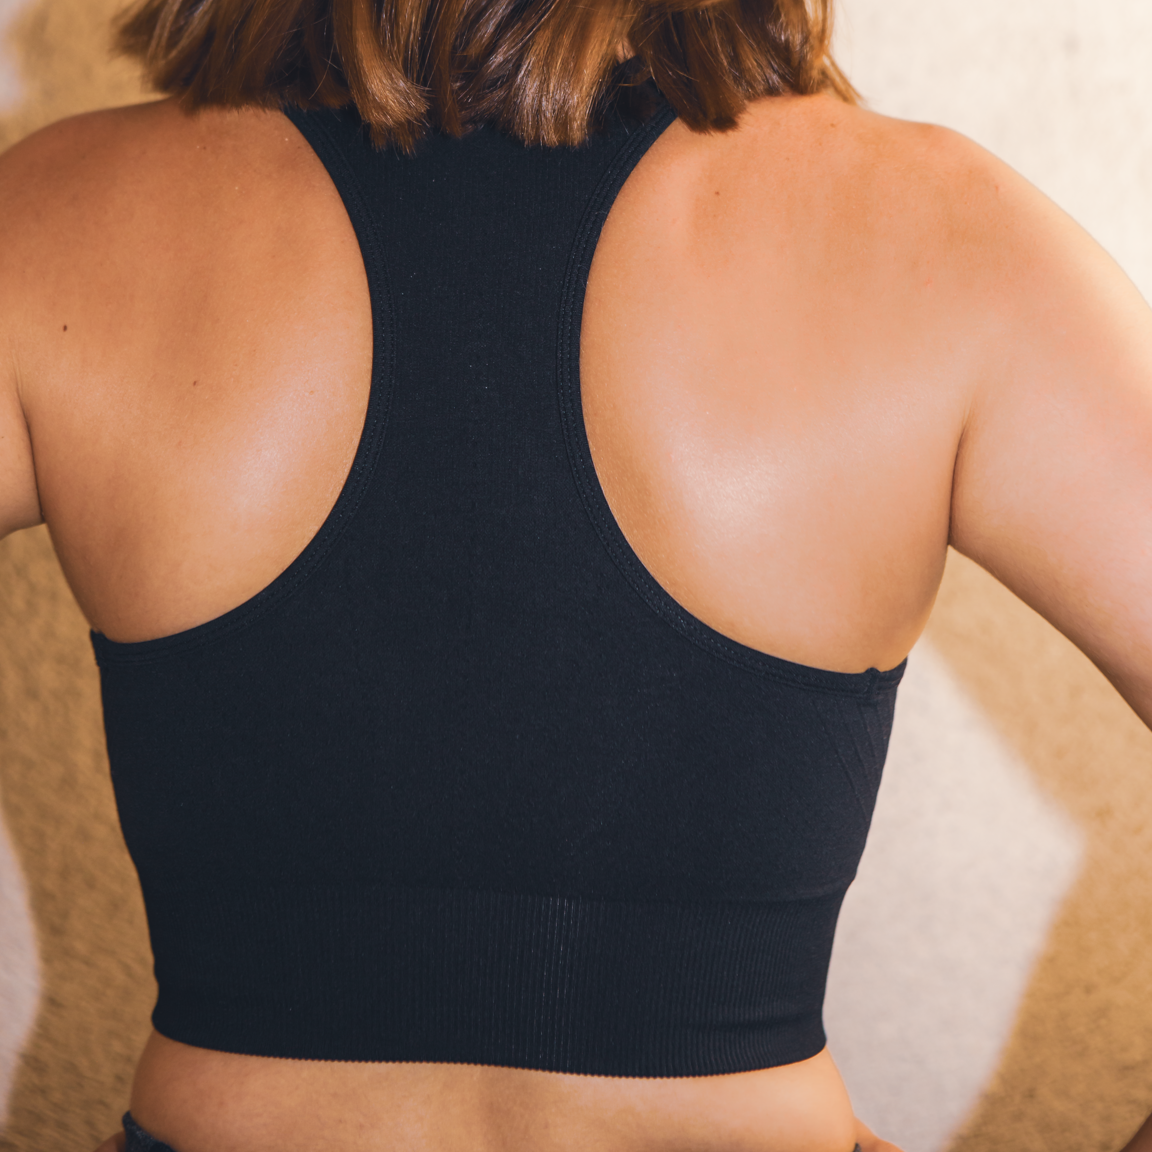 Rib and mesh details under the chest for optimal support. Racer back which allows great ease with each movement.